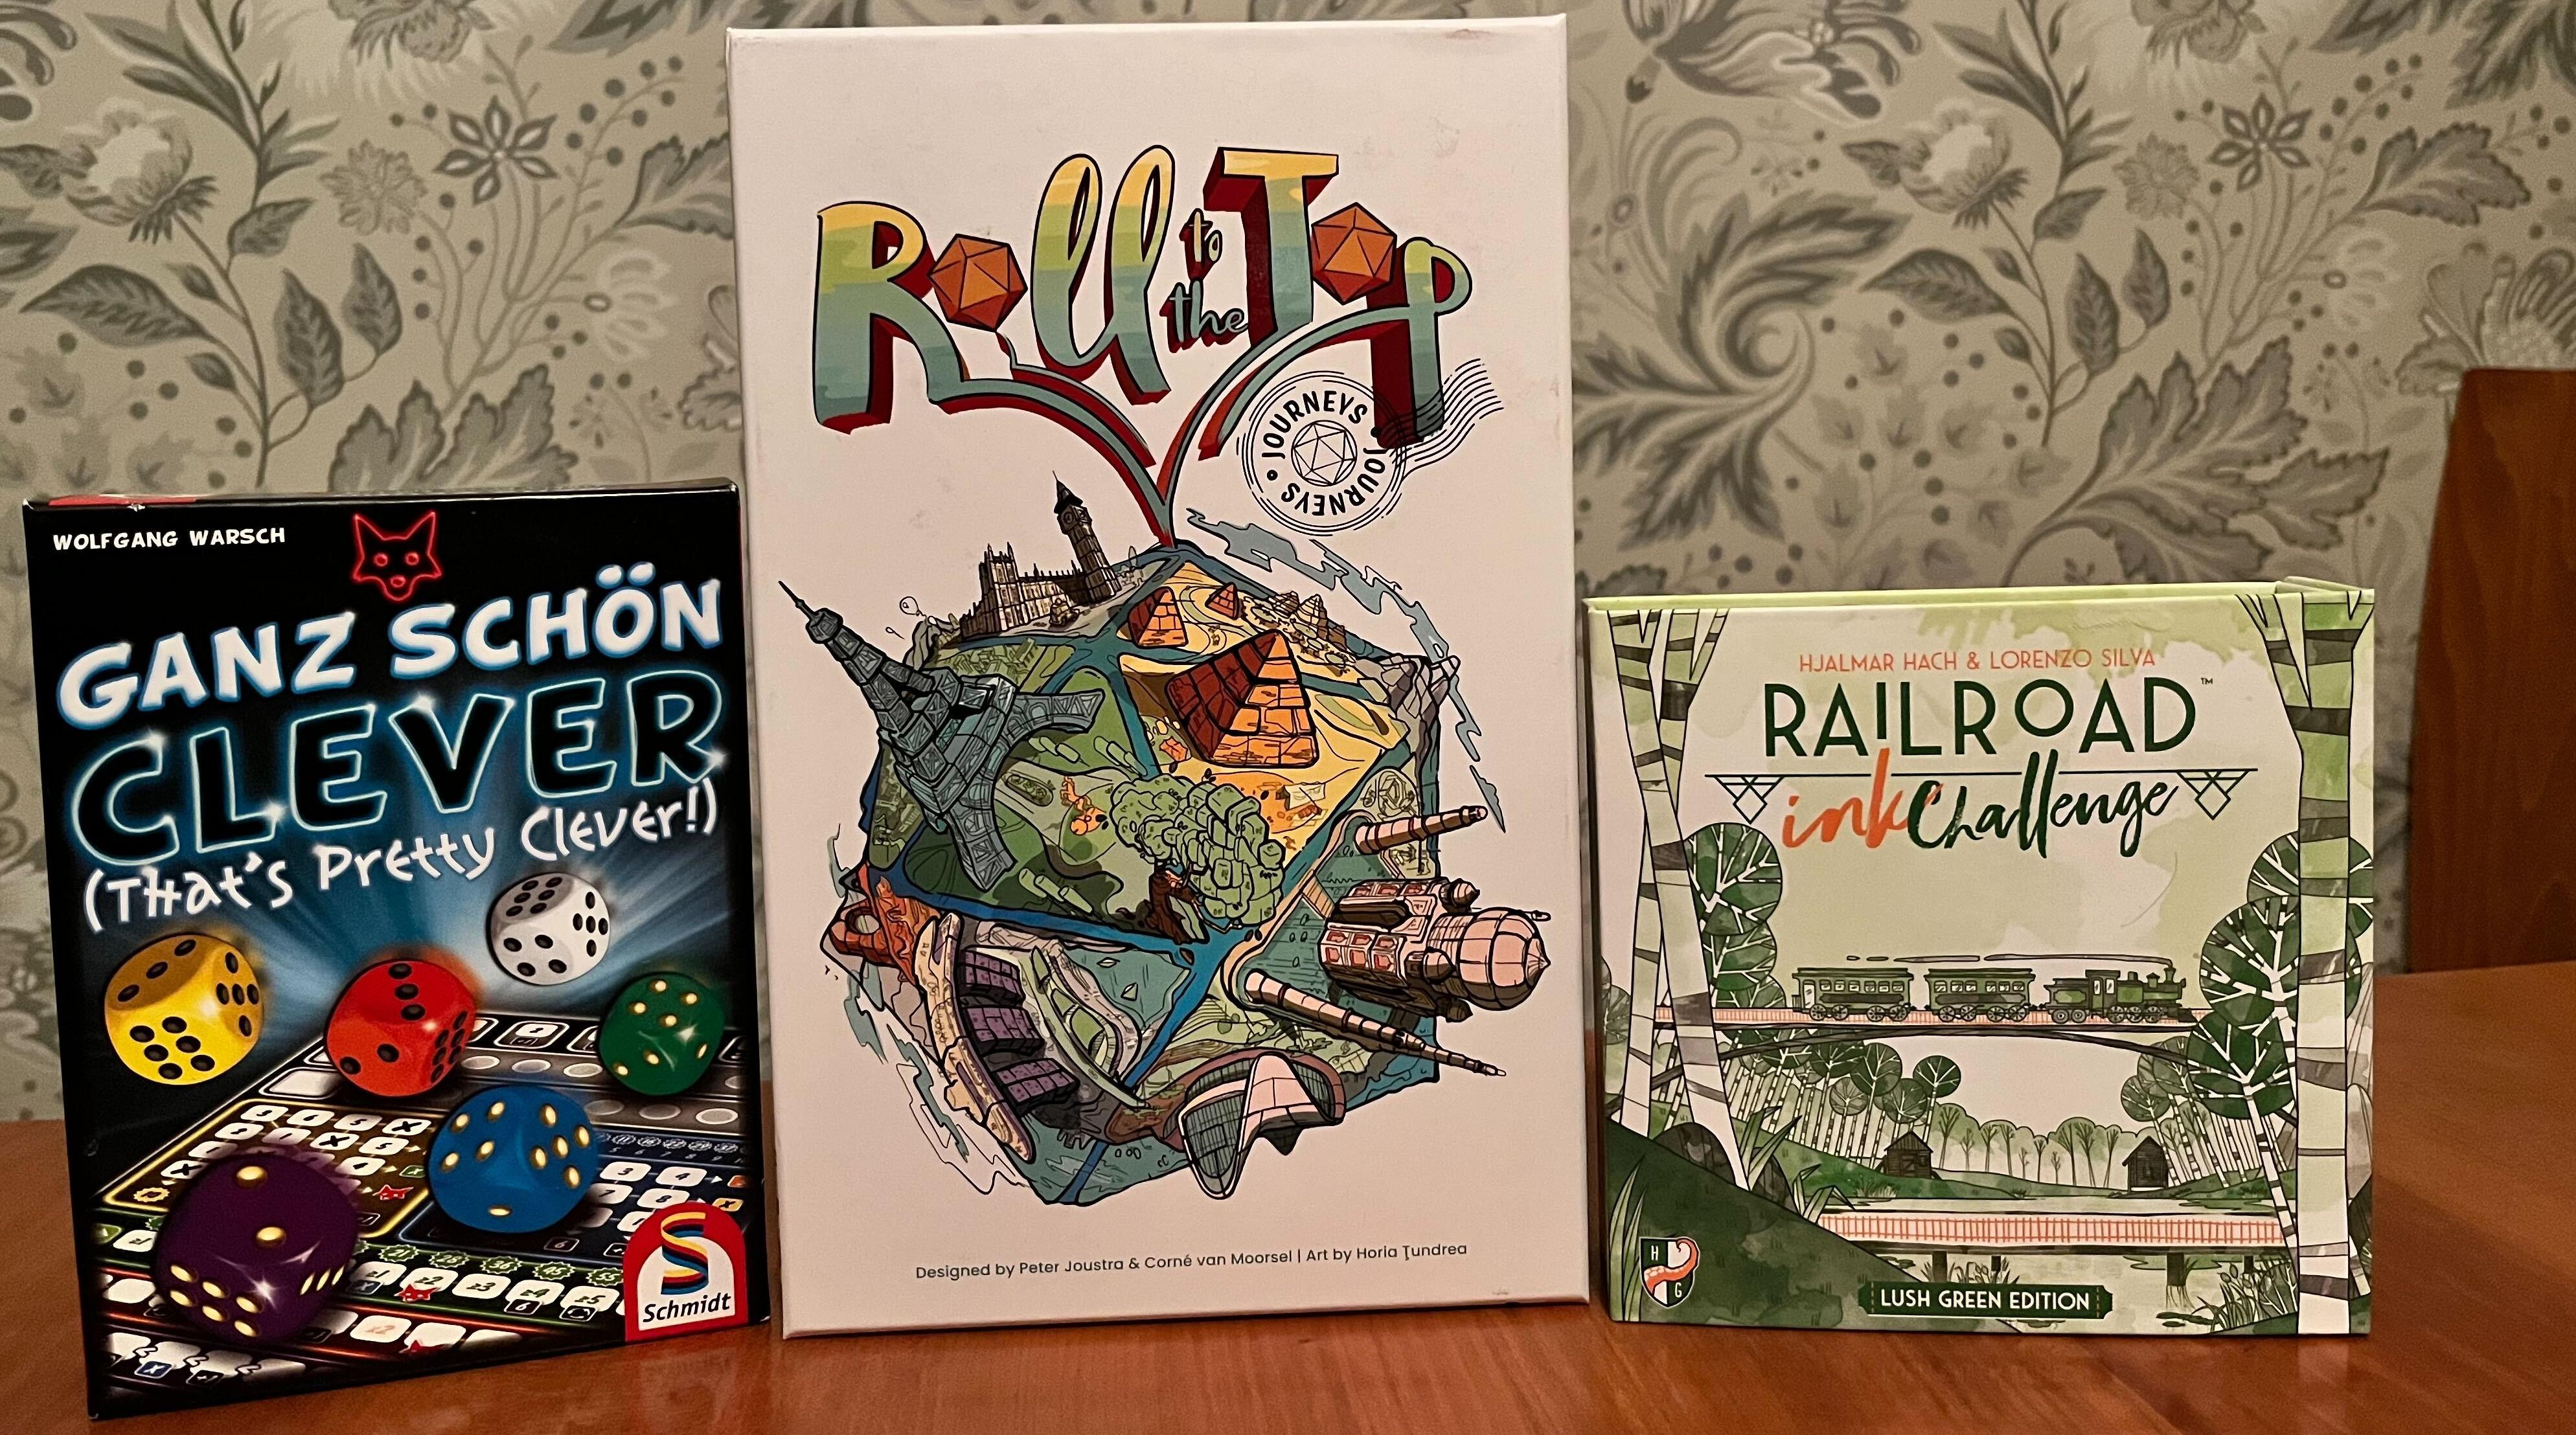  3 spillbokser: "That's Pretty Clever", "Roll to the Top Journeys" og "Railroad Ink Green edition"